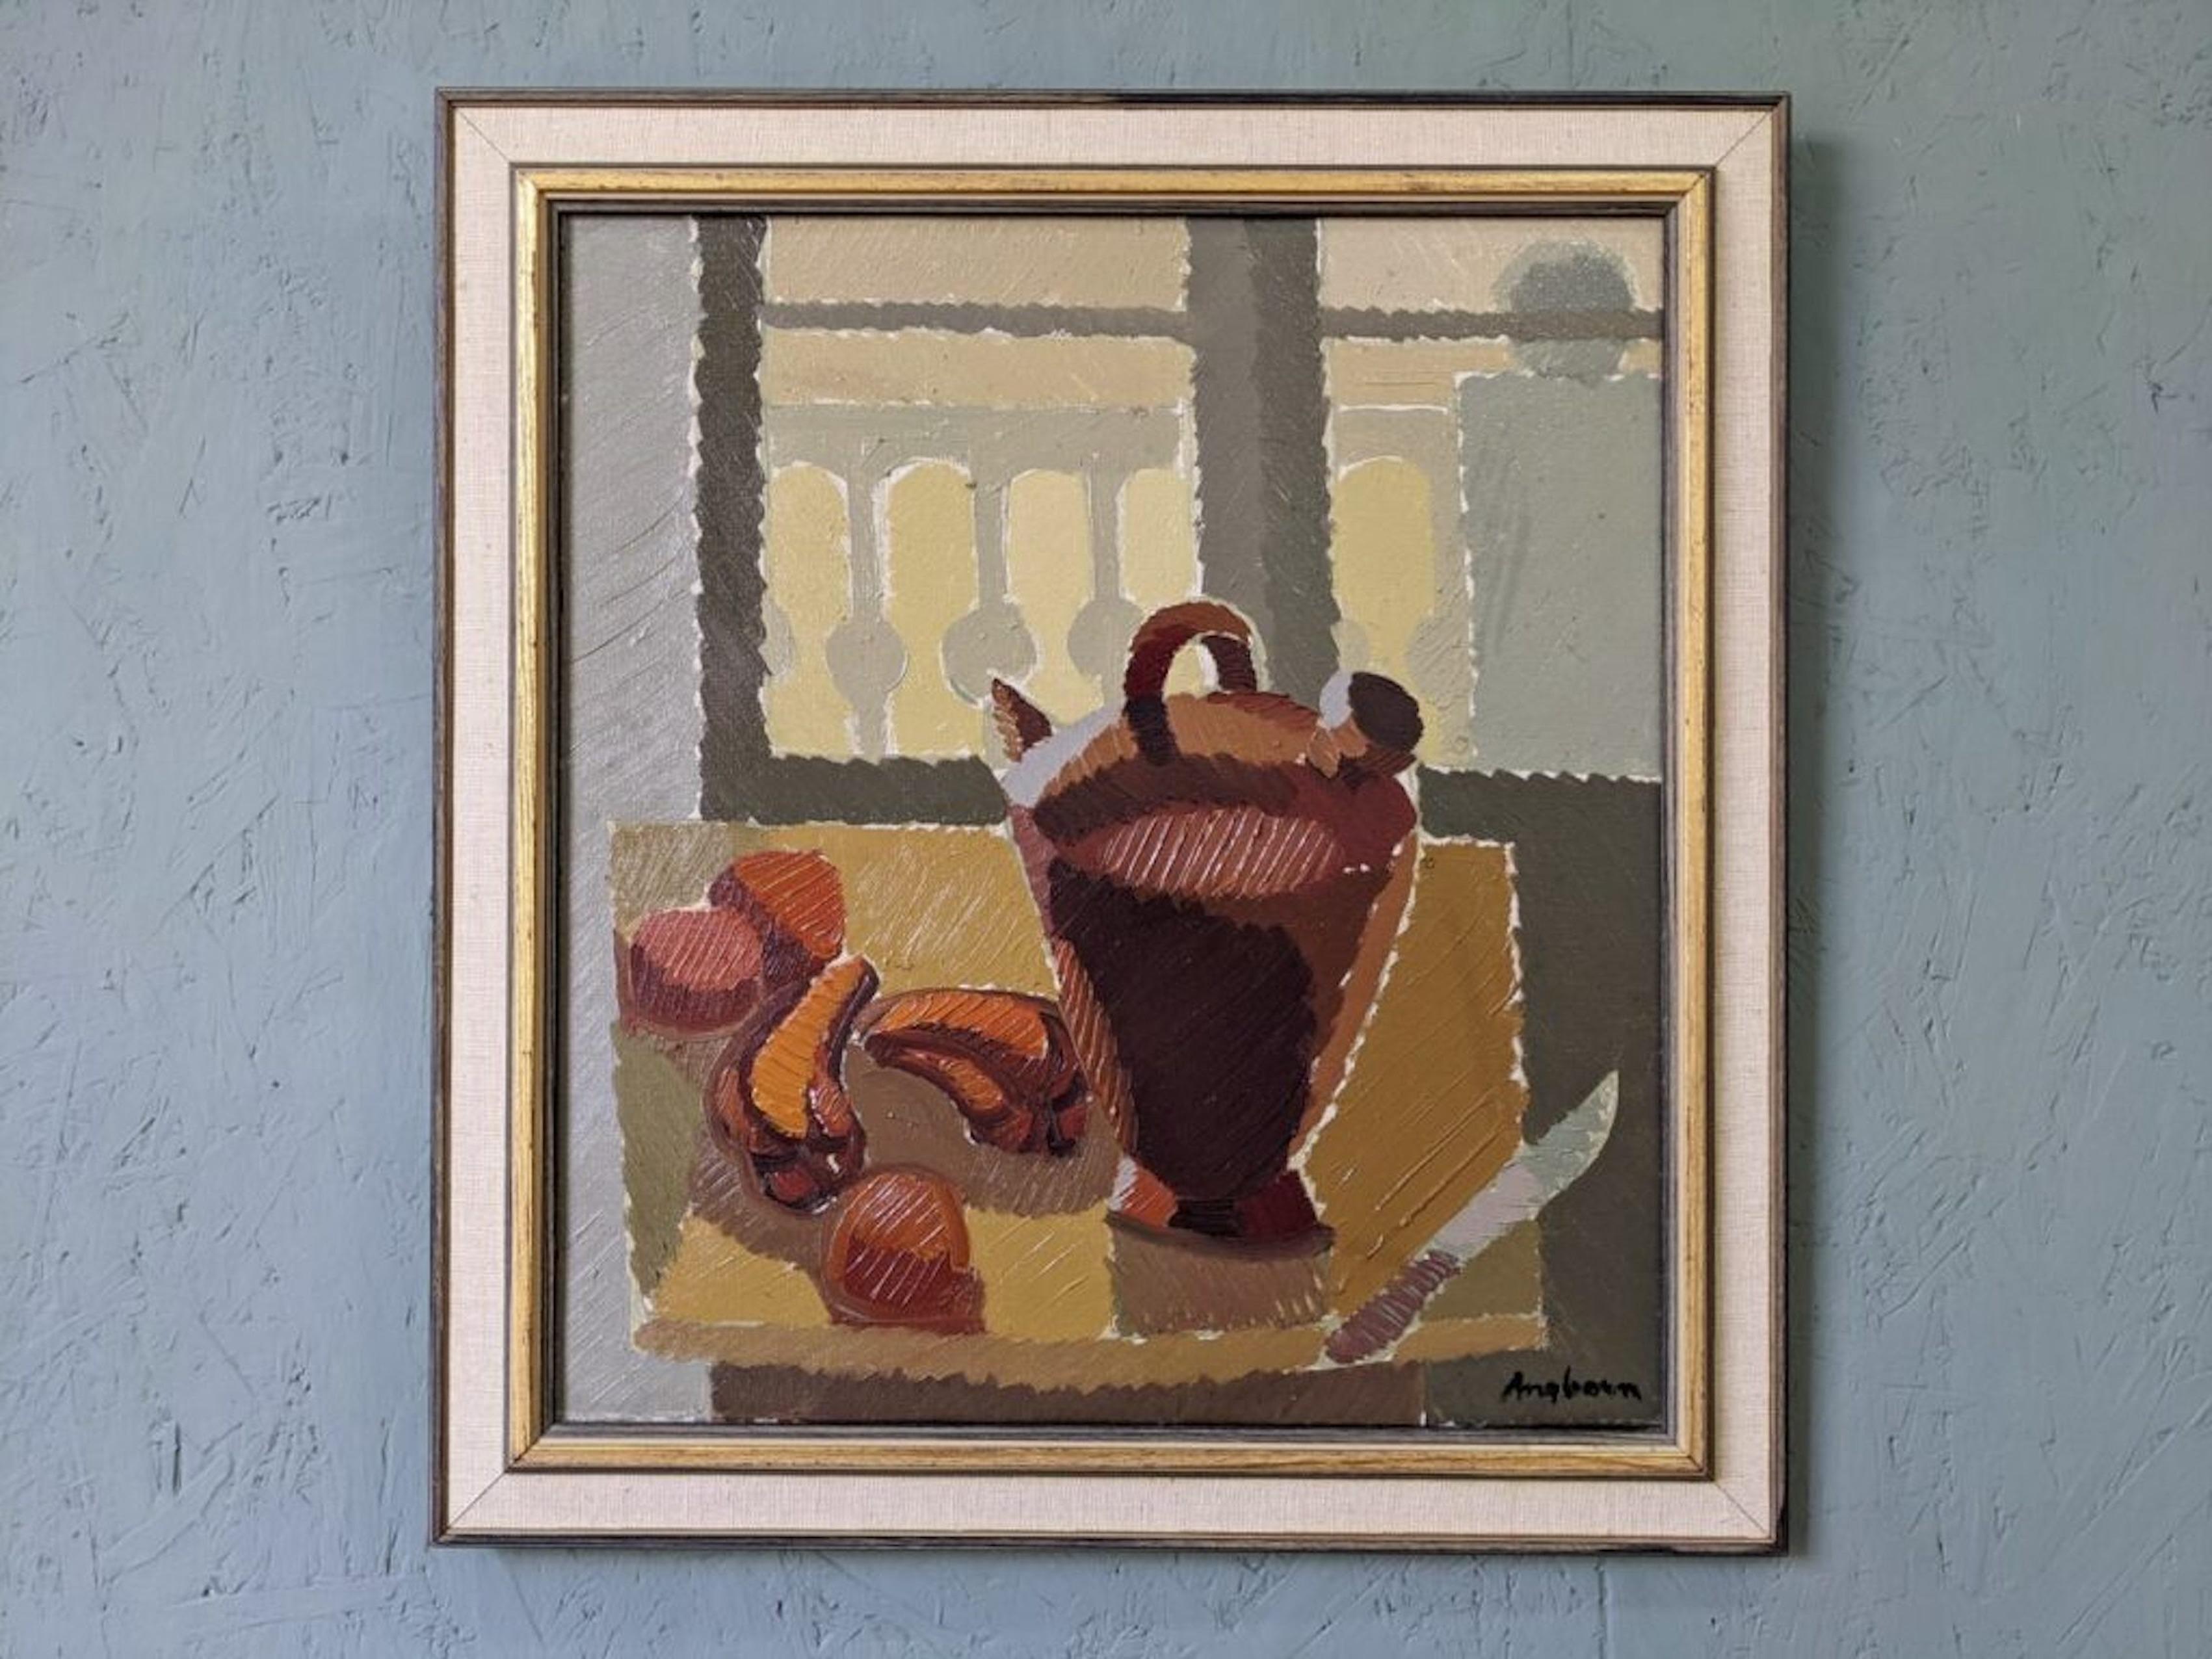 Still Life by the Window
Size: 55 x 51 cm (including frame)
Oil on Canvas

A delightful mid 20th century still life composition, executed in oil onto canvas.

The composition presents an interior setting, where a brown jug, red peppers, onions and a